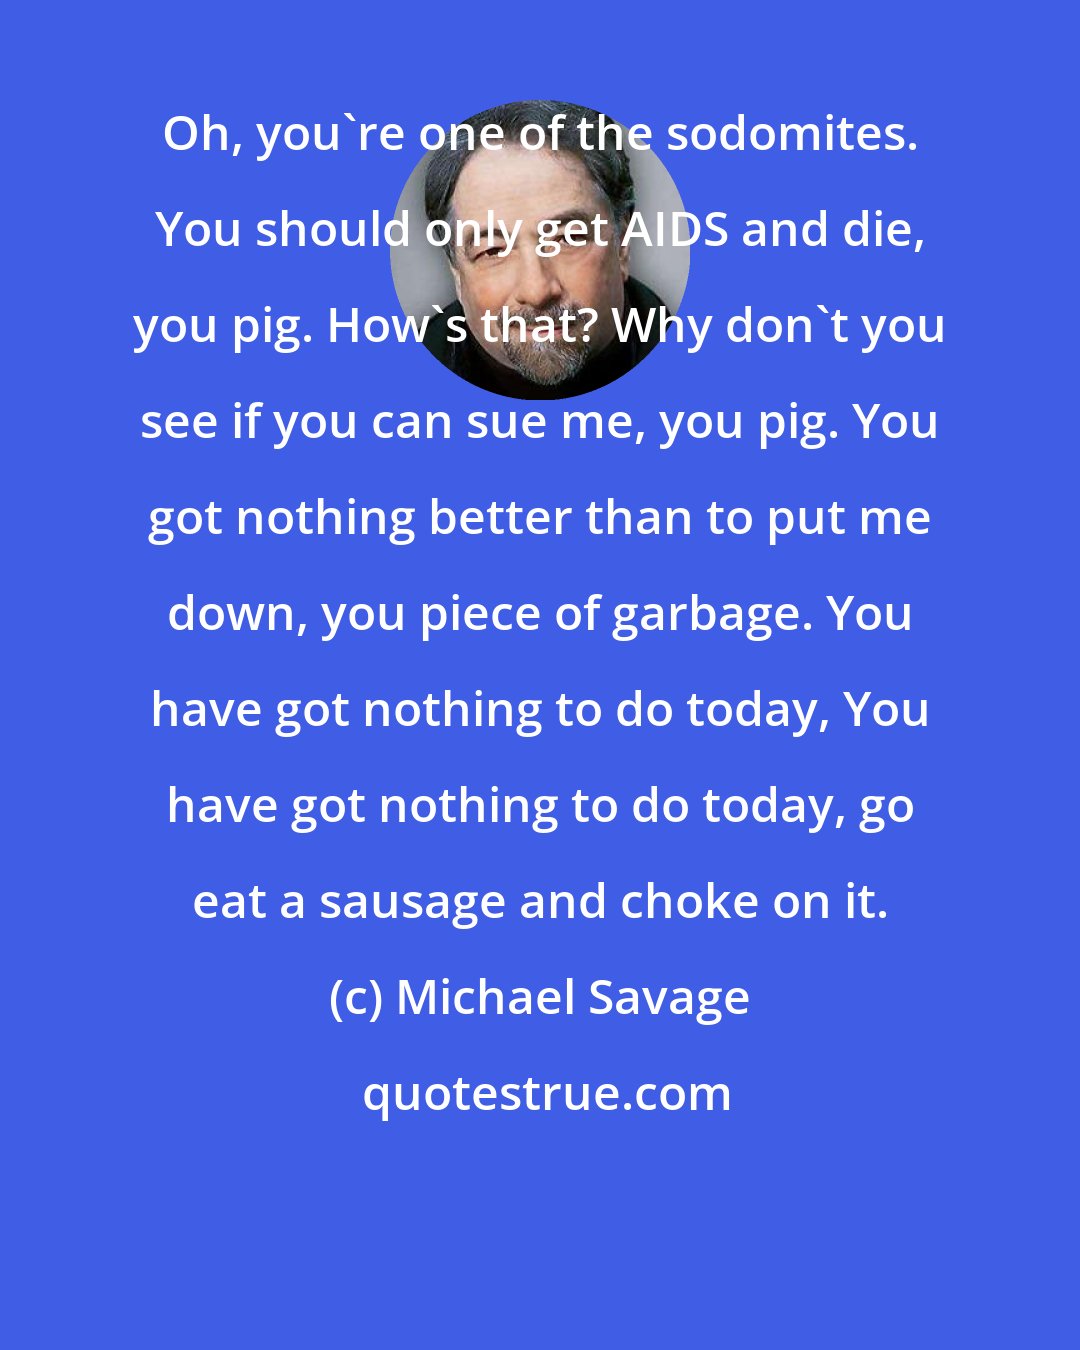 Michael Savage: Oh, you're one of the sodomites. You should only get AIDS and die, you pig. How's that? Why don't you see if you can sue me, you pig. You got nothing better than to put me down, you piece of garbage. You have got nothing to do today, You have got nothing to do today, go eat a sausage and choke on it.